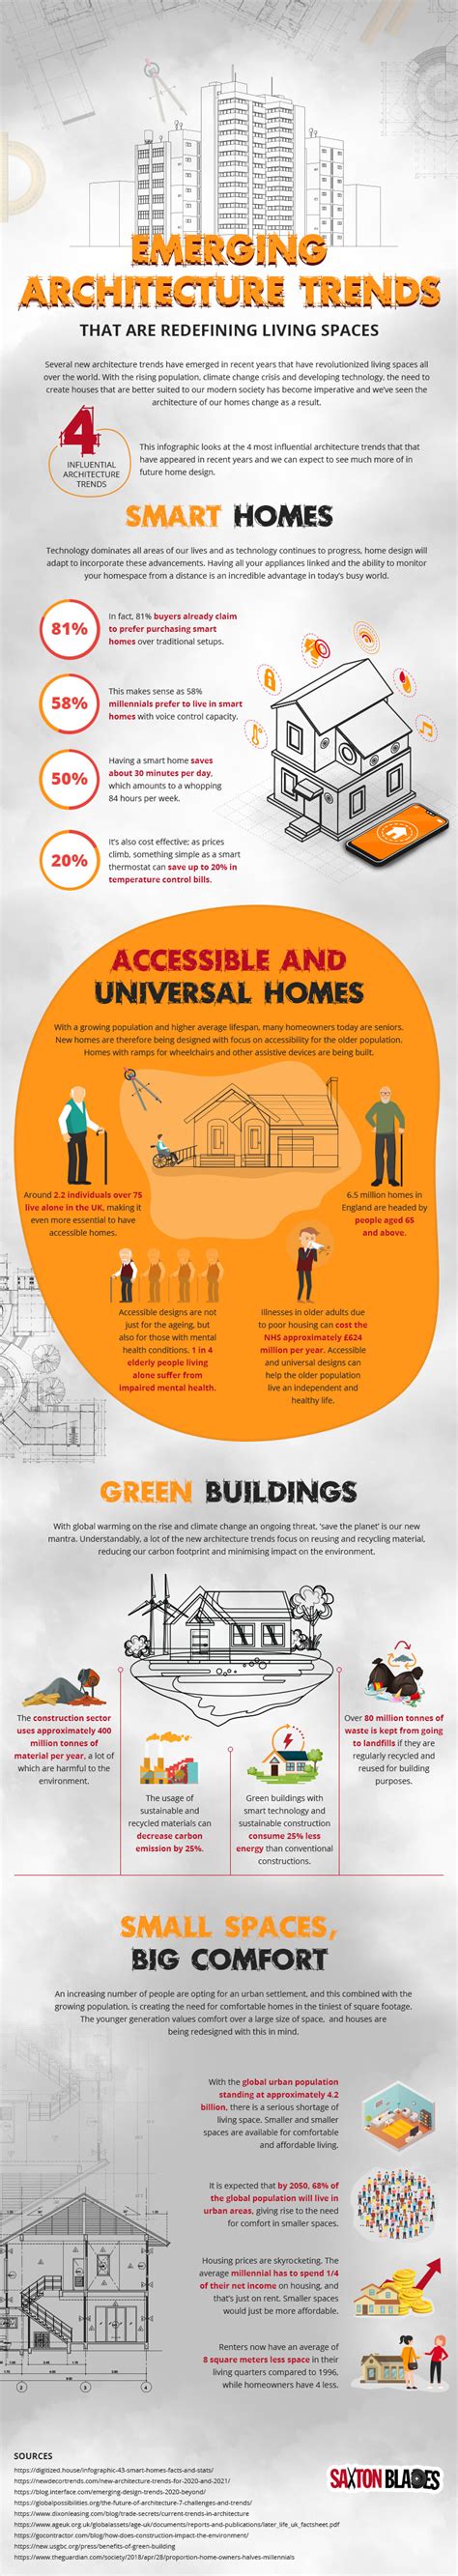 Architecture Trends That Are Redefining Living Spaces Infographic